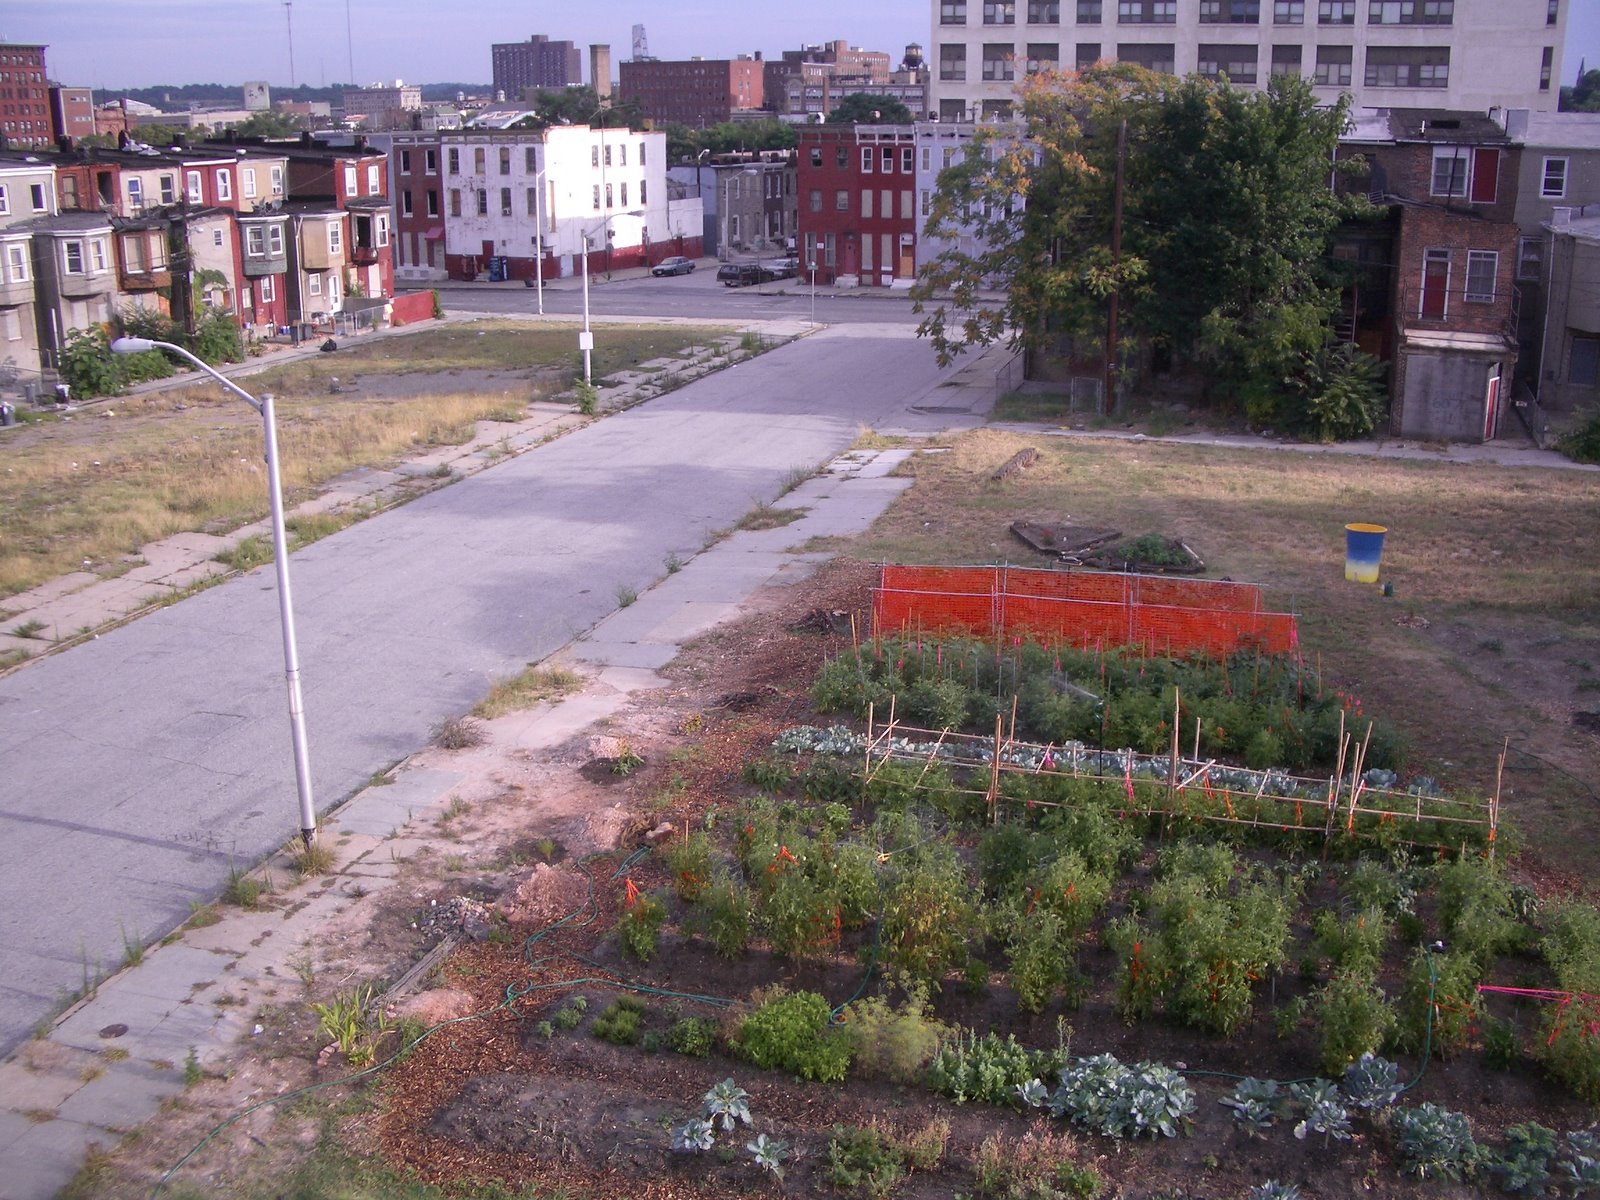 What Is Urban Agriculture Sprouts In The Sidewalk